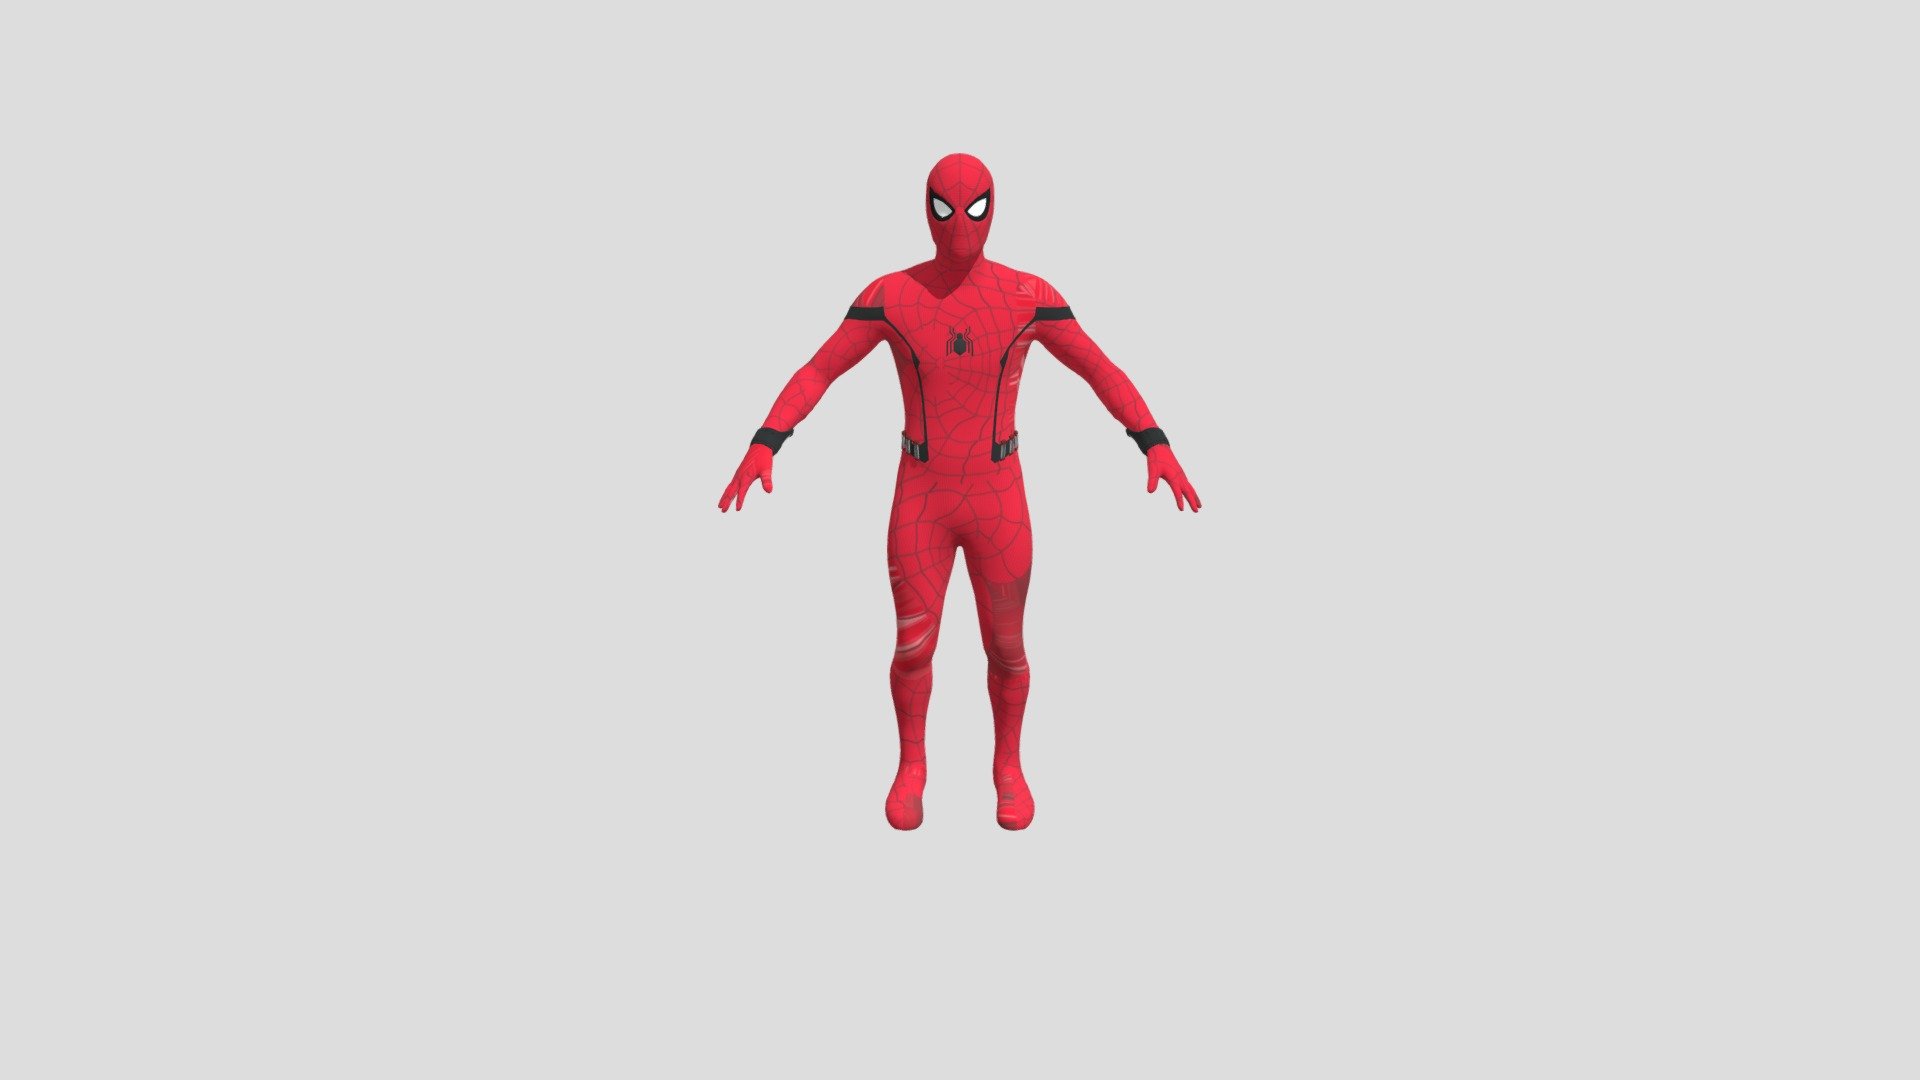 DOWNLOAD LINK :- https://shrinke.me/3o9J7Ug

download from here it will support me.

spiderman homecoming
spiderman intothespiderverse - SPIDEMAN HOMECOMING SUIT - 3D model by fenixxx 3d model